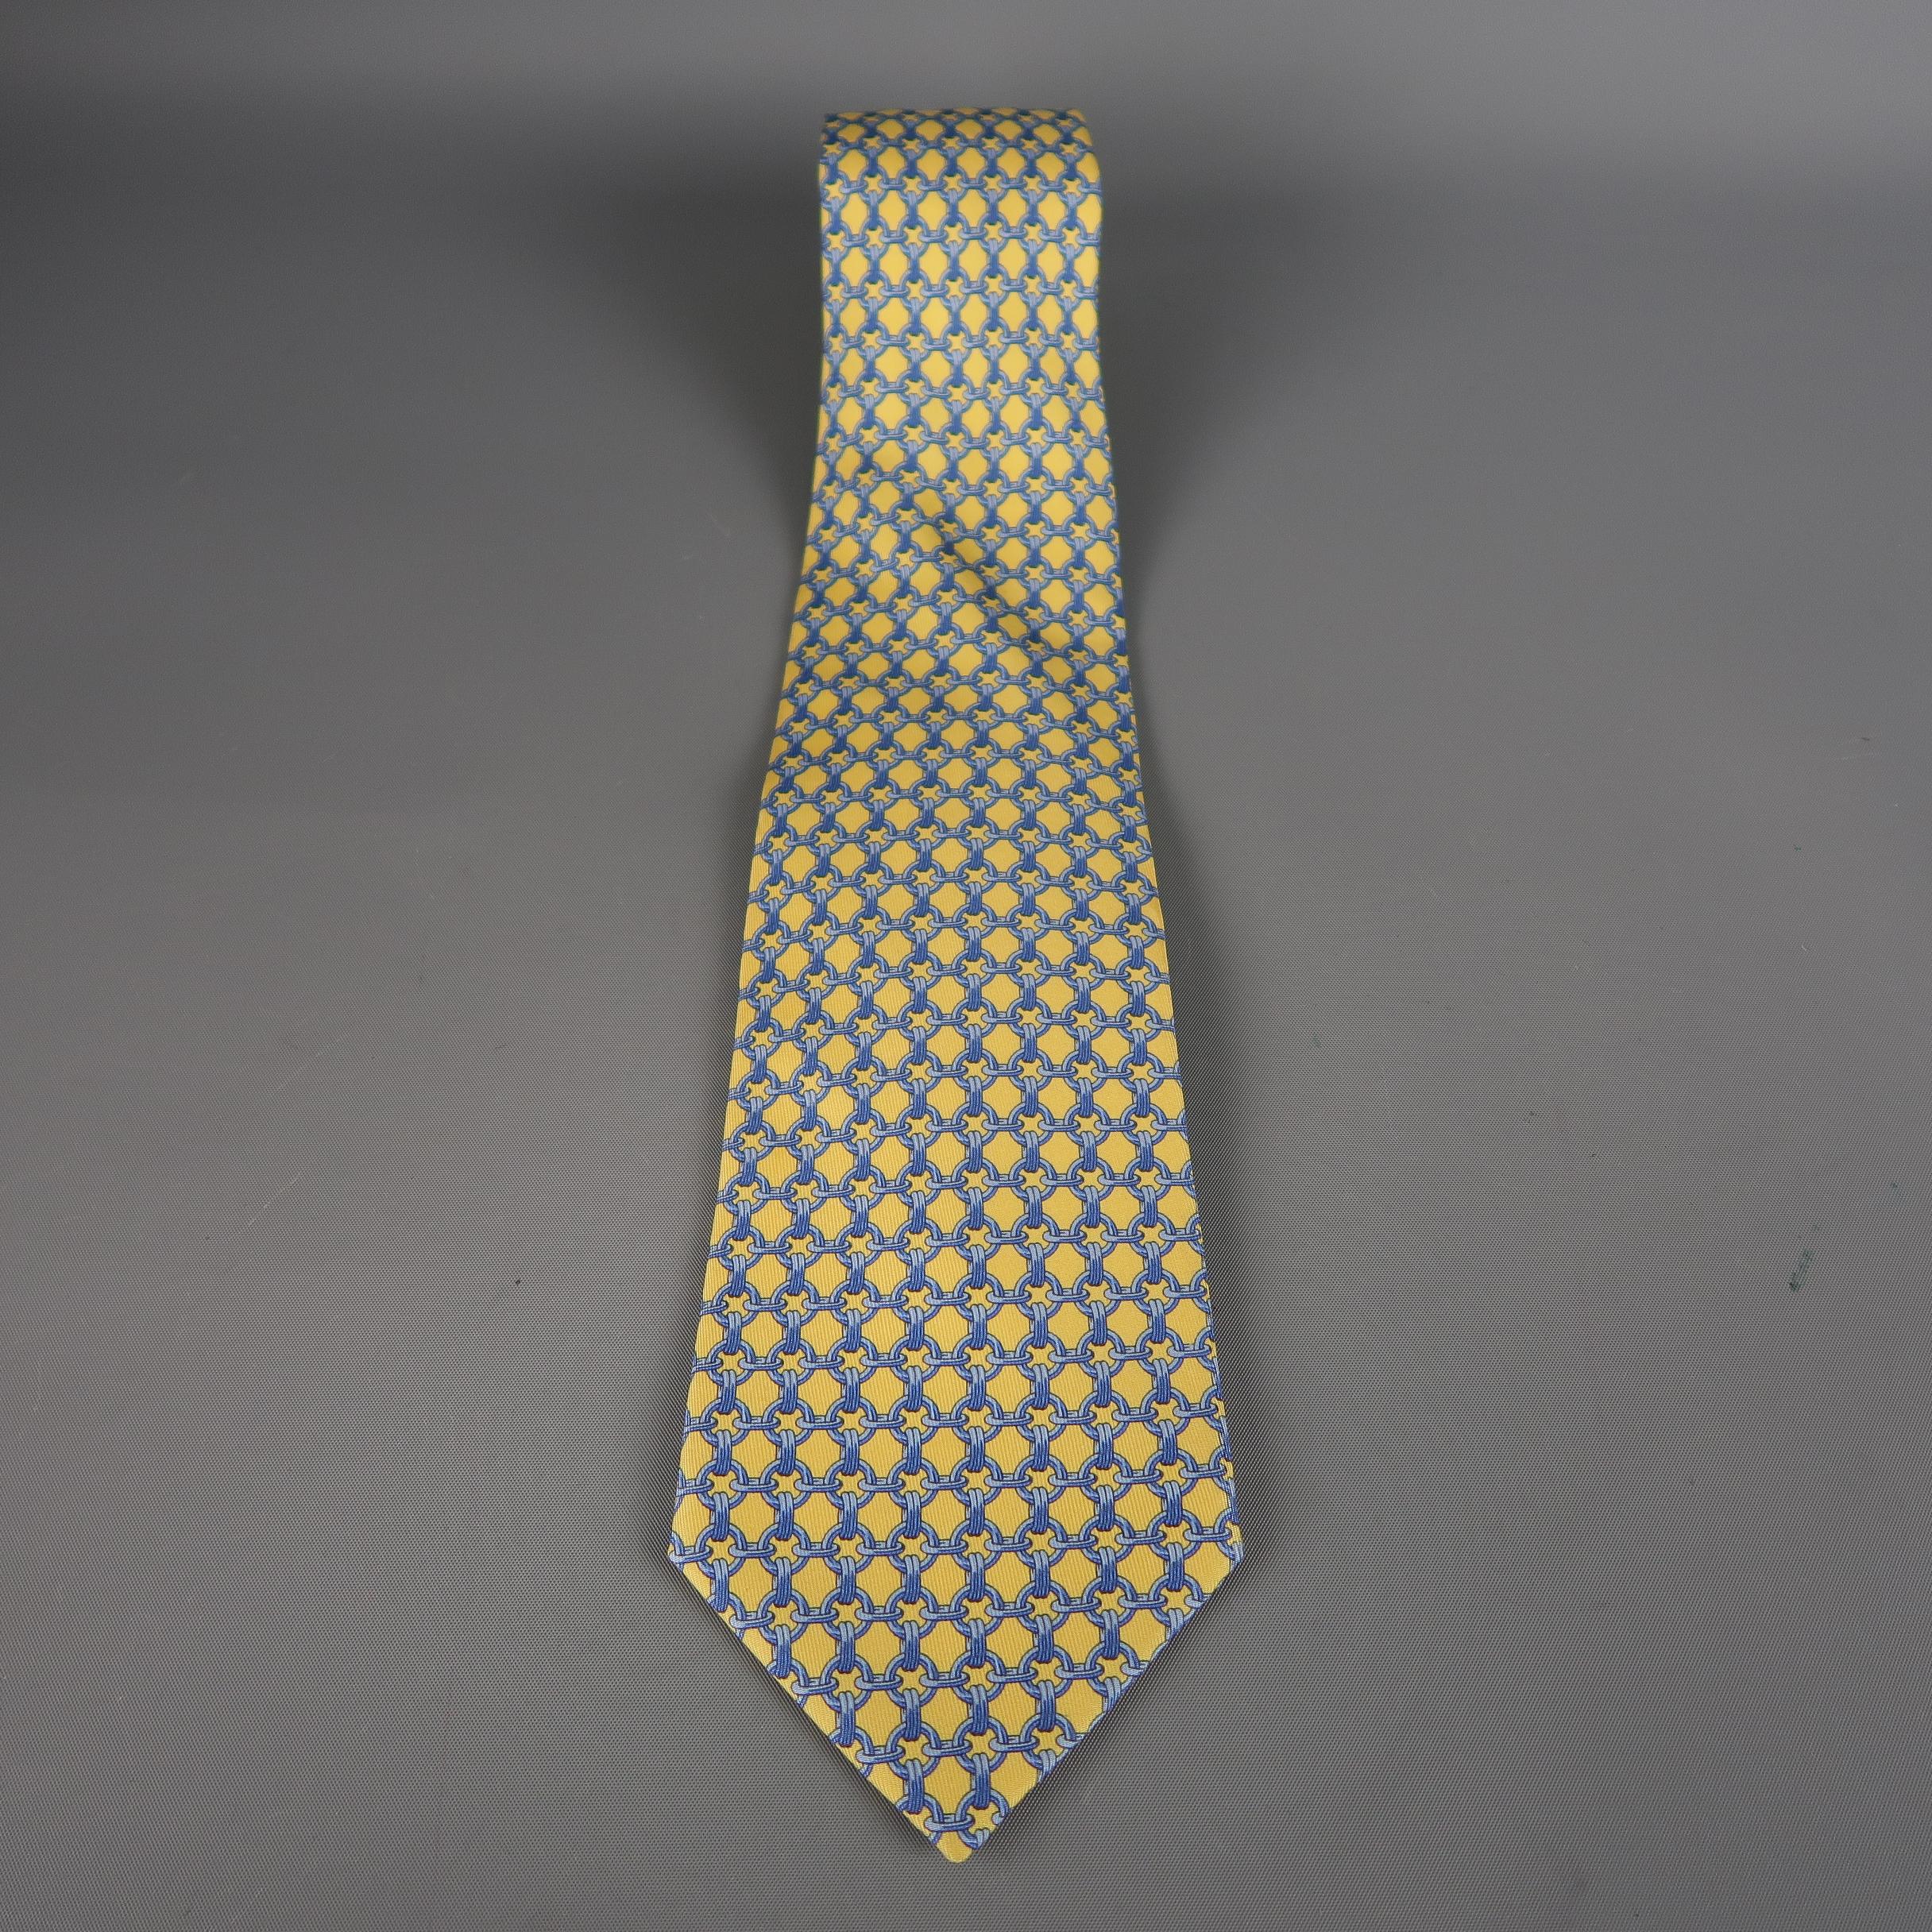 HERMES tie come in yellow silk with an all over blue tones chain print. Made in France.
 
Excellent Pre-Owned Condition.
 
Width: 3.5 in.